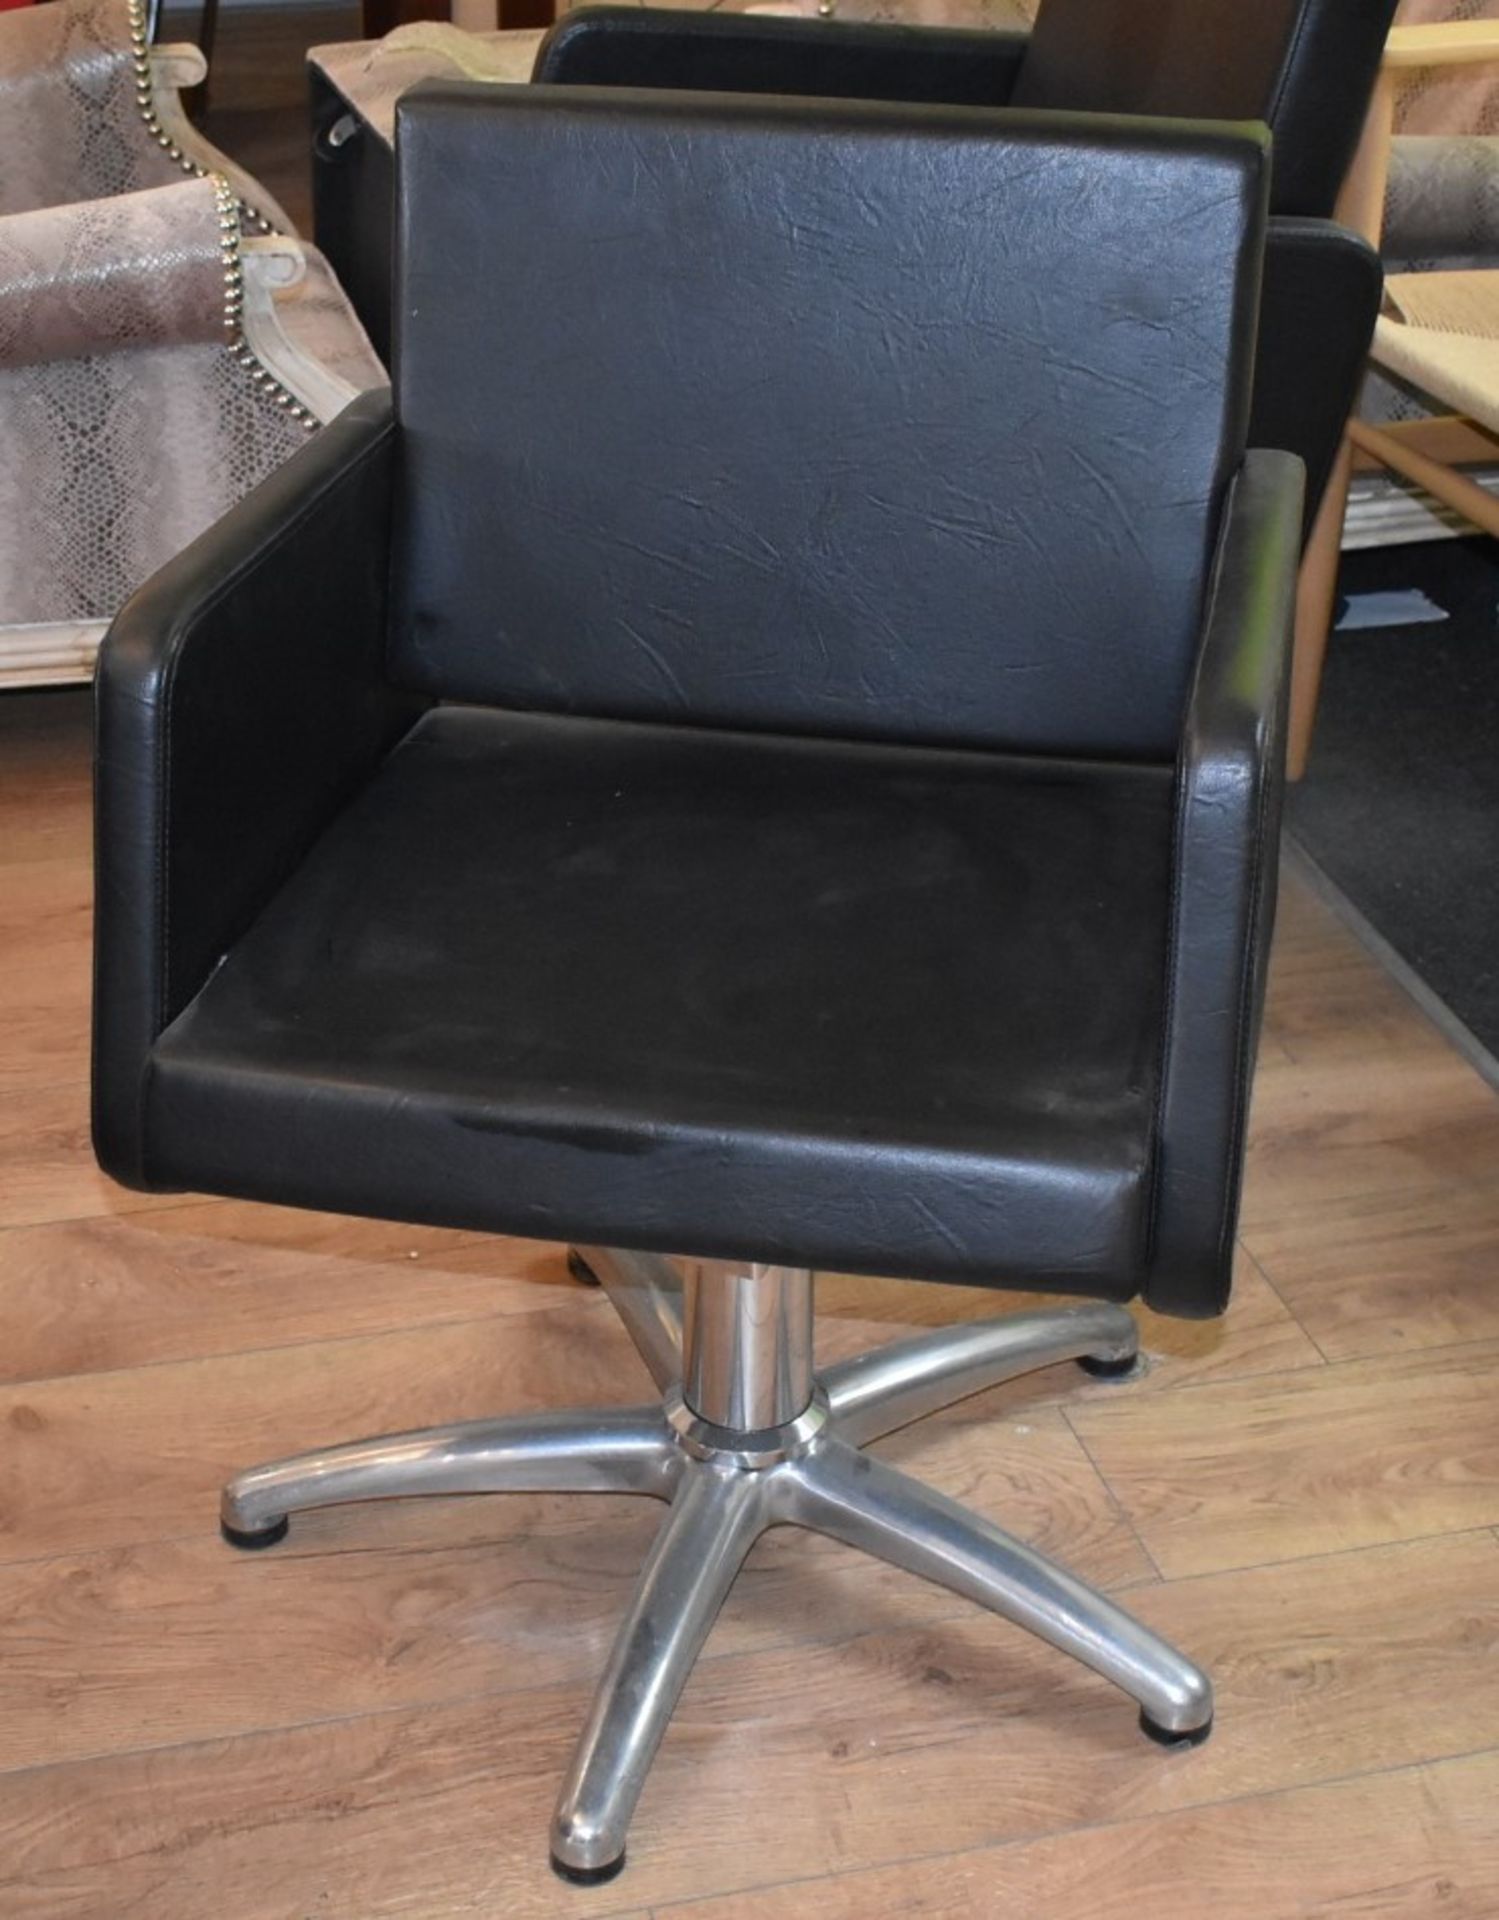 1 x REM Professional Stylist Chair In Black Faux Leather - Ex-Display Showroom Piece - Ref: G056 G/